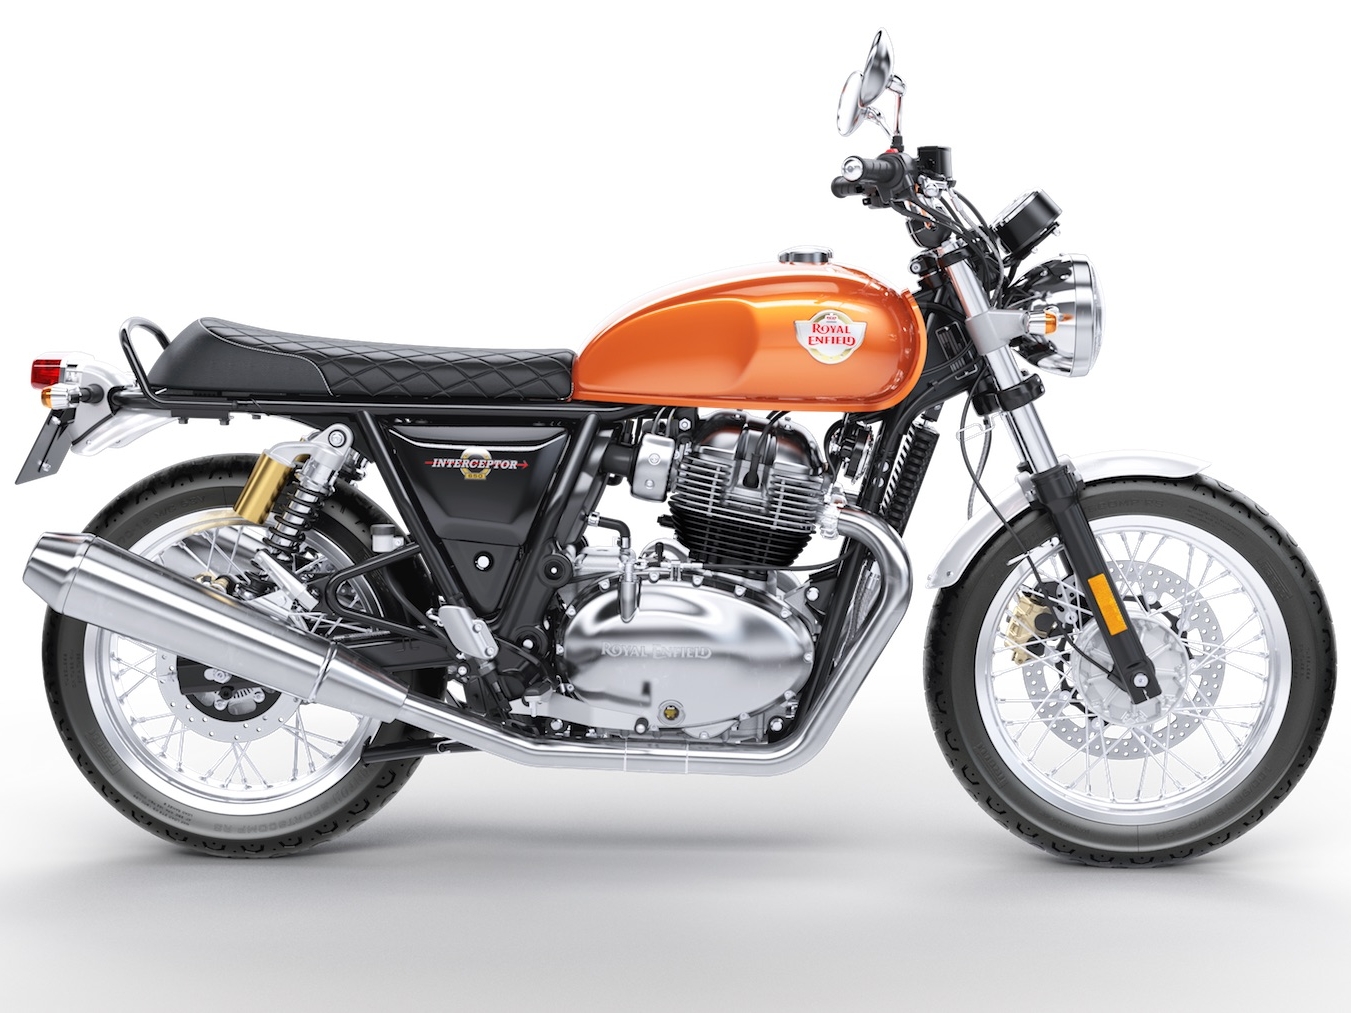 2020 Royal Enfield INT650 Buyer's Guide: Specs, Photos, Price